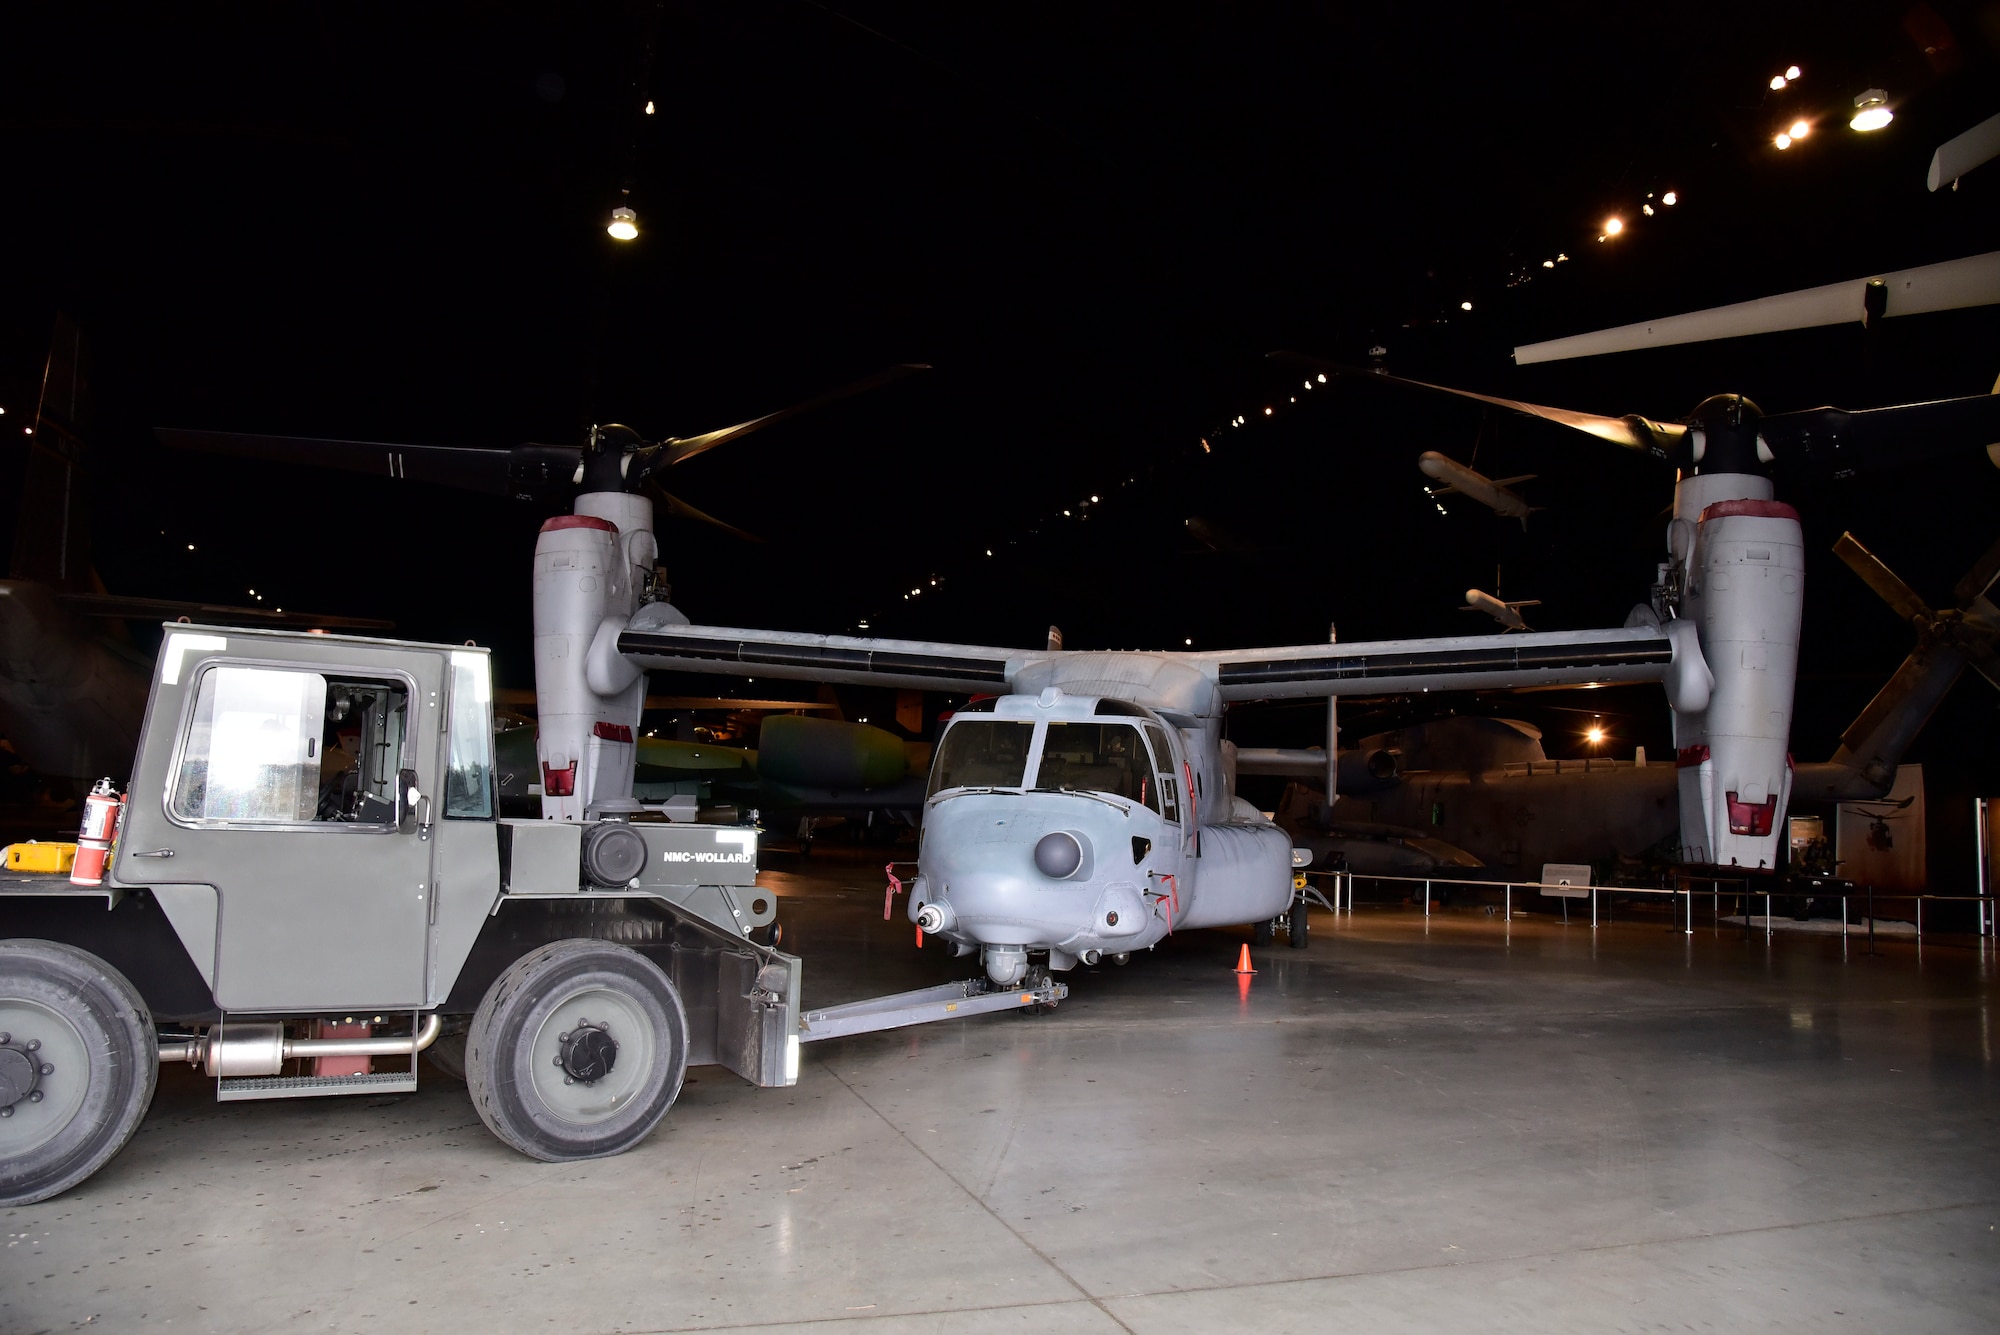 DAYTON, Ohio -- The Bell-Boeing CV-22B Osprey being moved into its new home in the Cold War Gallery at the National Museum of the U.S. Air Force on Jan. 26, 2017.(U.S. Air Force photo by Ken LaRock